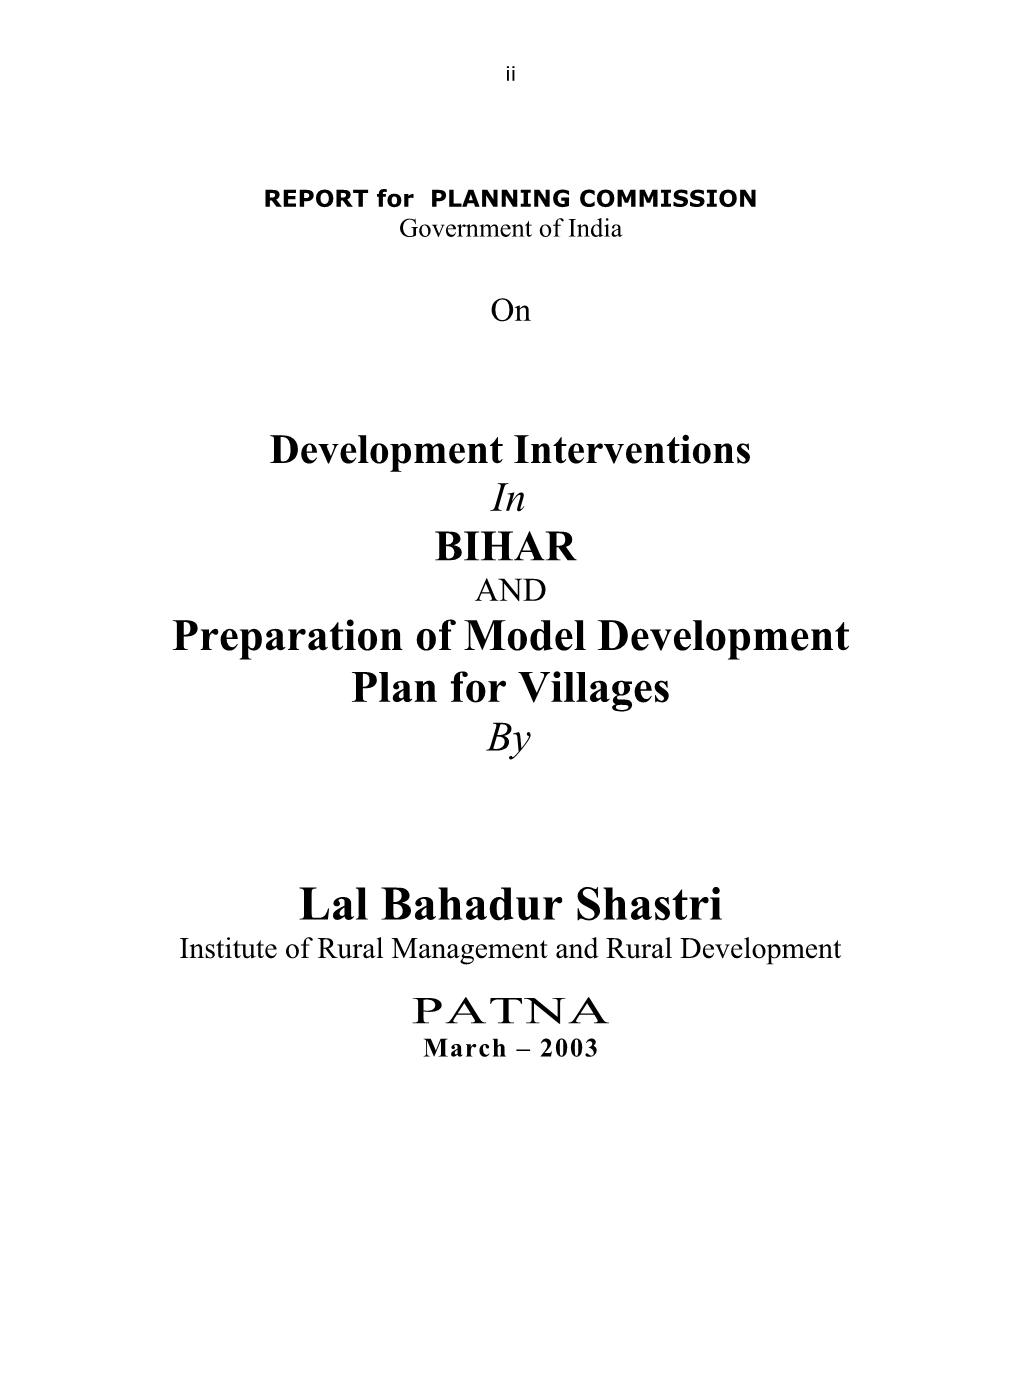 REPORT for PLANNING COMMISSION